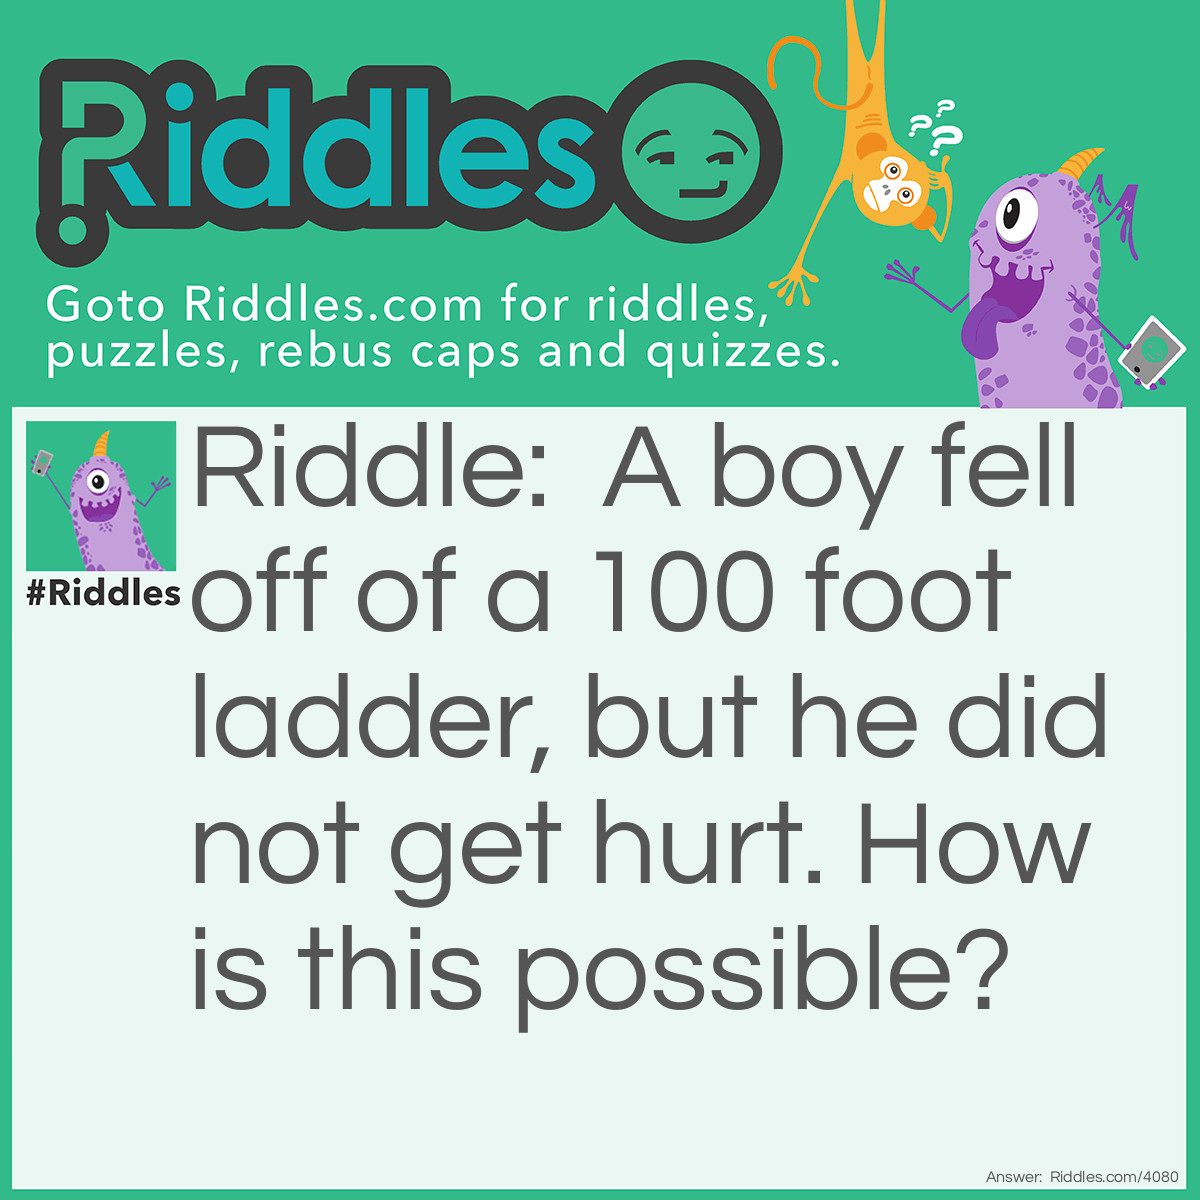 Riddle: A boy fell off of a 100 foot ladder, but he did not get hurt. How is this possible? Answer: He was only on the first step.